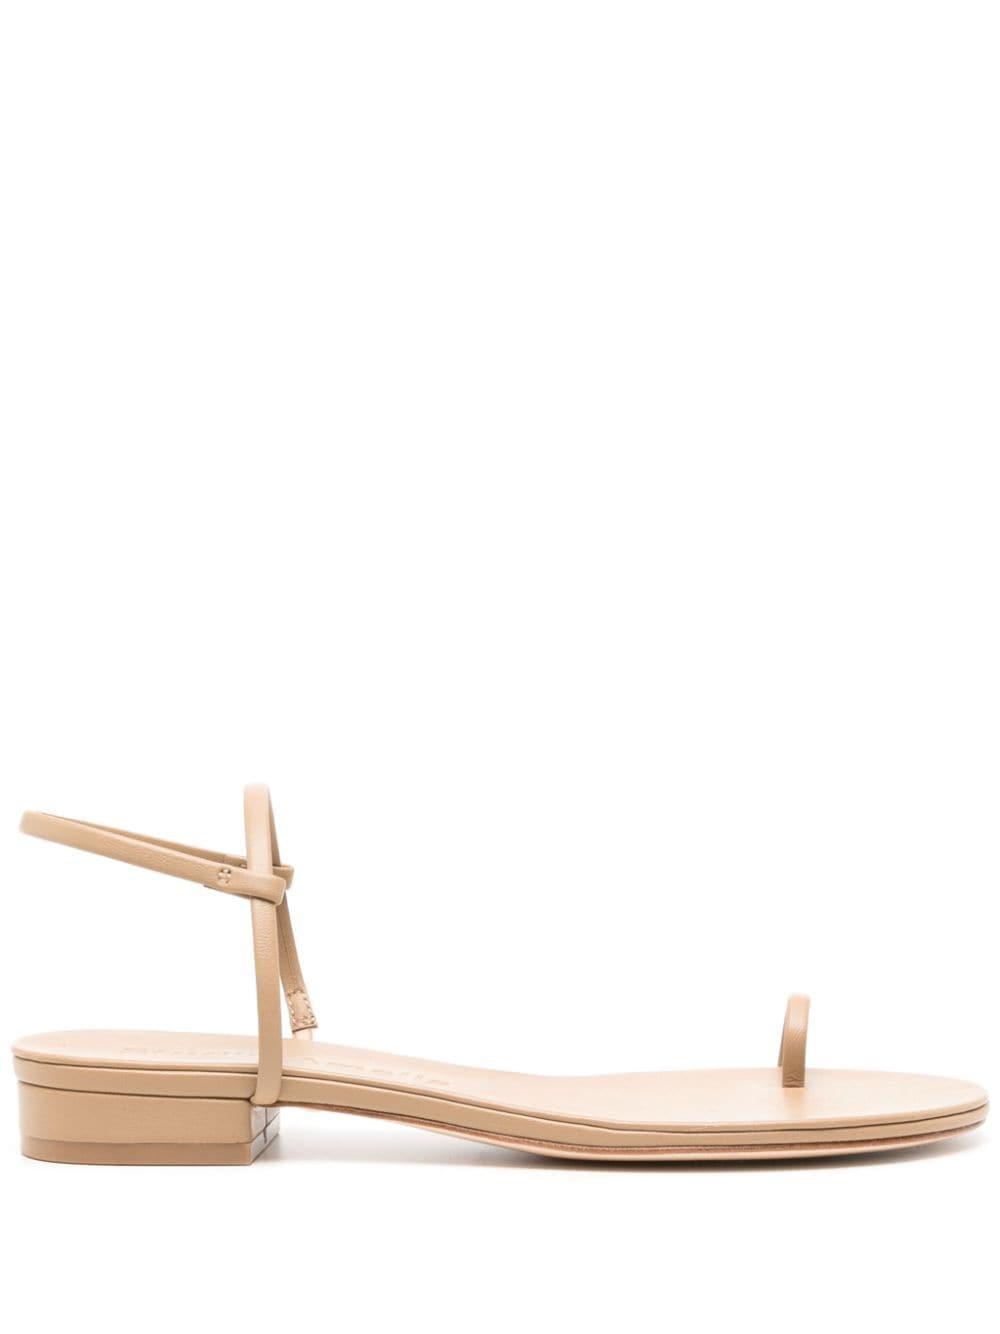 STUDIO AMELIA Edith Flat Leather Sandals in Natural | Lyst UK